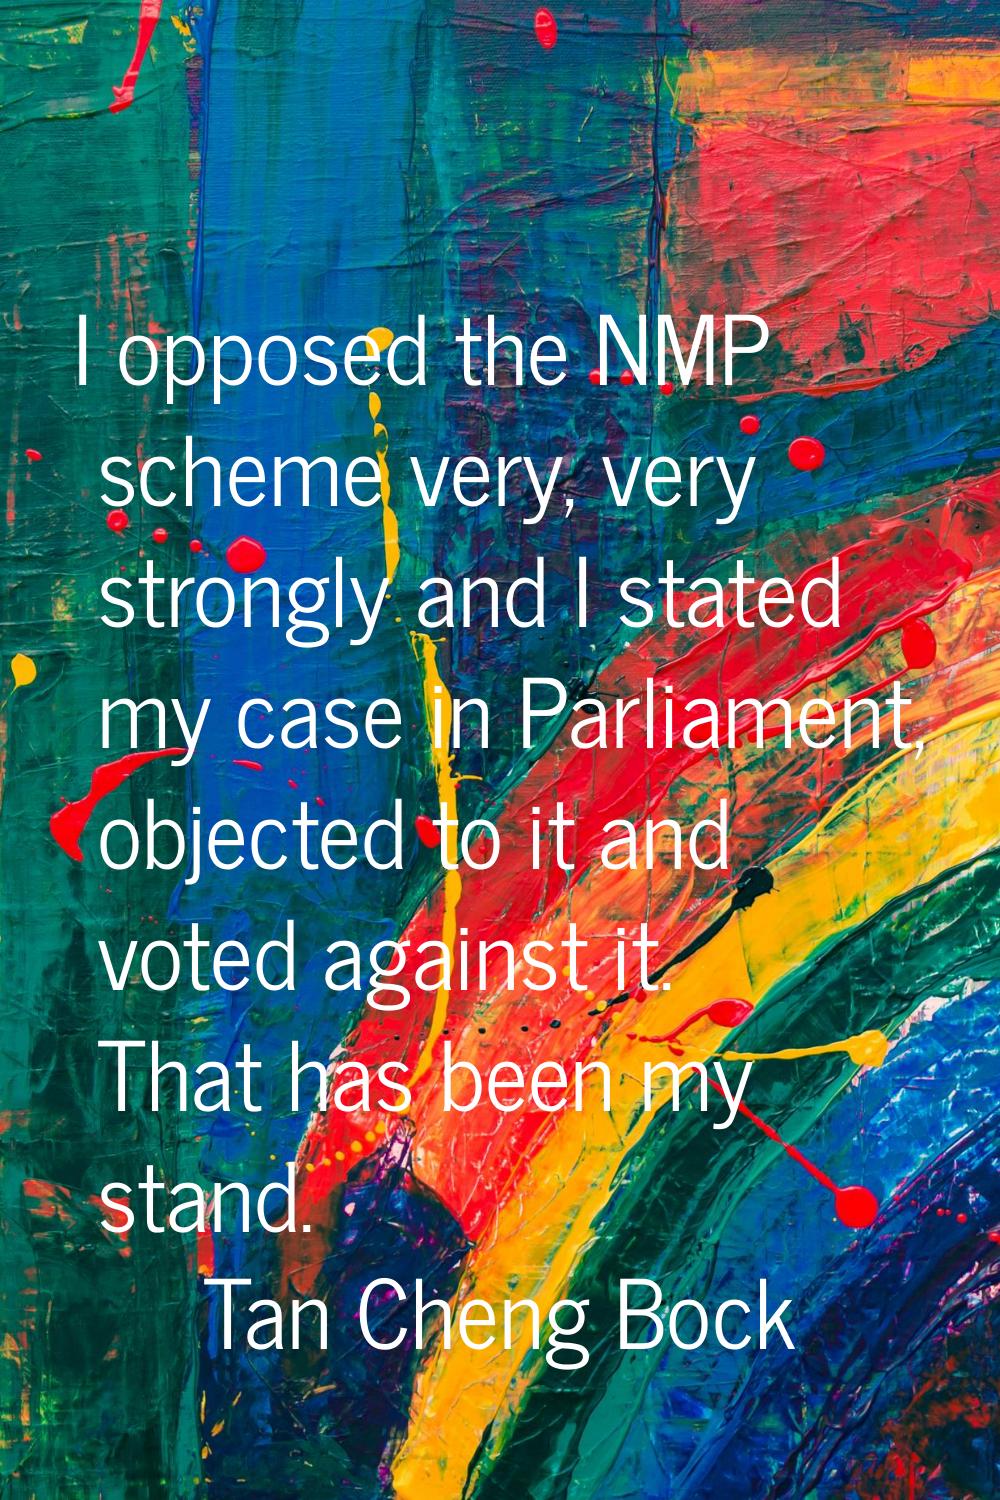 I opposed the NMP scheme very, very strongly and I stated my case in Parliament, objected to it and